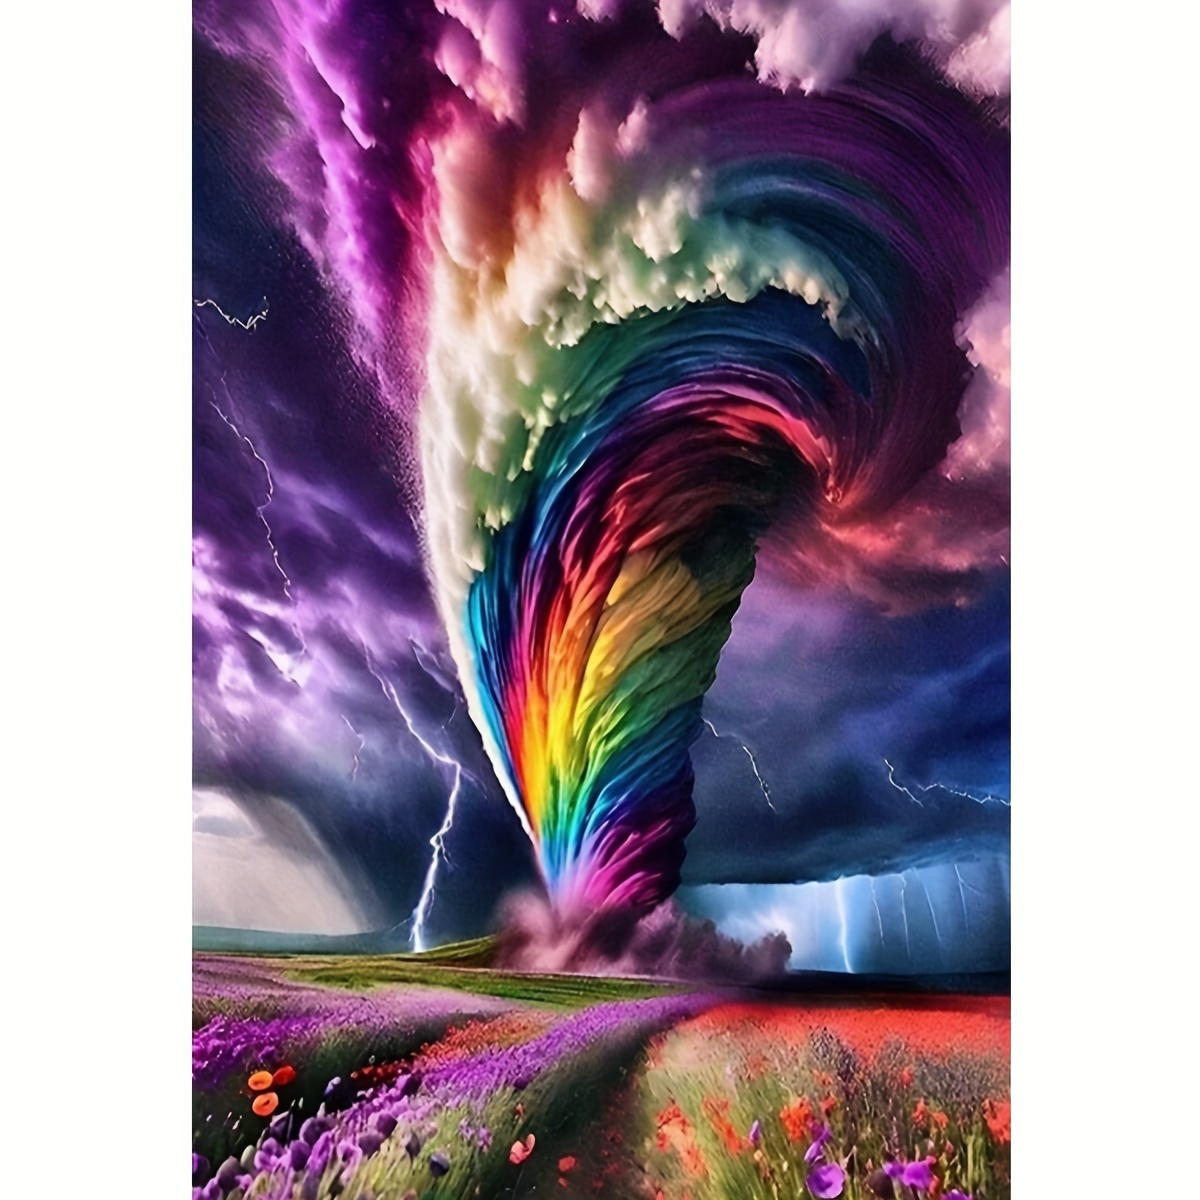 

1pc Colorful Hurricane Landscape Pattern Diamond Art Painting Kit 5d Diamond Art Set Painting With Diamond Gems, Arts And Crafts For Home Wall Decor. No Frame (20x30cm/7.87x11.8inch)